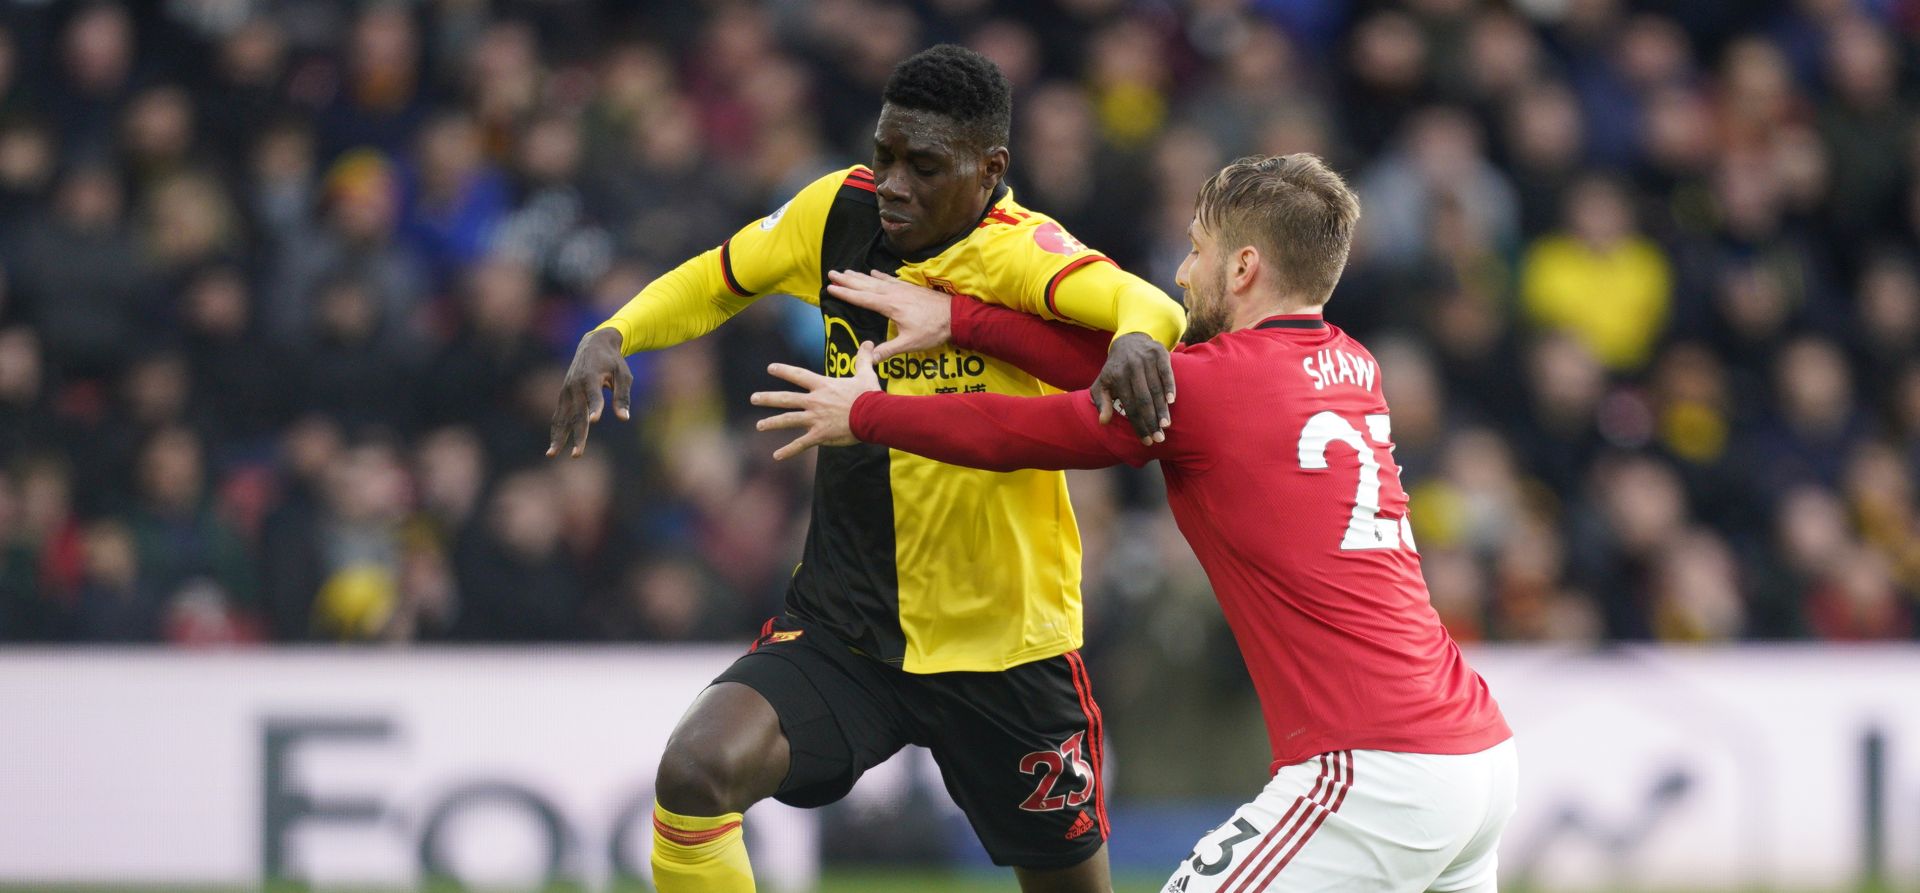 epa08086871 Watford's Ismaila Sarr (L) vies for the ball against Manchester United's Luke Shaw (R) during the English Premier League soccer match between Watford and Manchester United at Vicarage Road Stadium, London Britain, 22 December 2019.  EPA/WILL OLIVER EDITORIAL USE ONLY. No use with unauthorized audio, video, data, fixture lists, club/league logos or 'live' services. Online in-match use limited to 120 images, no video emulation. No use in betting, games or single club/league/player publications